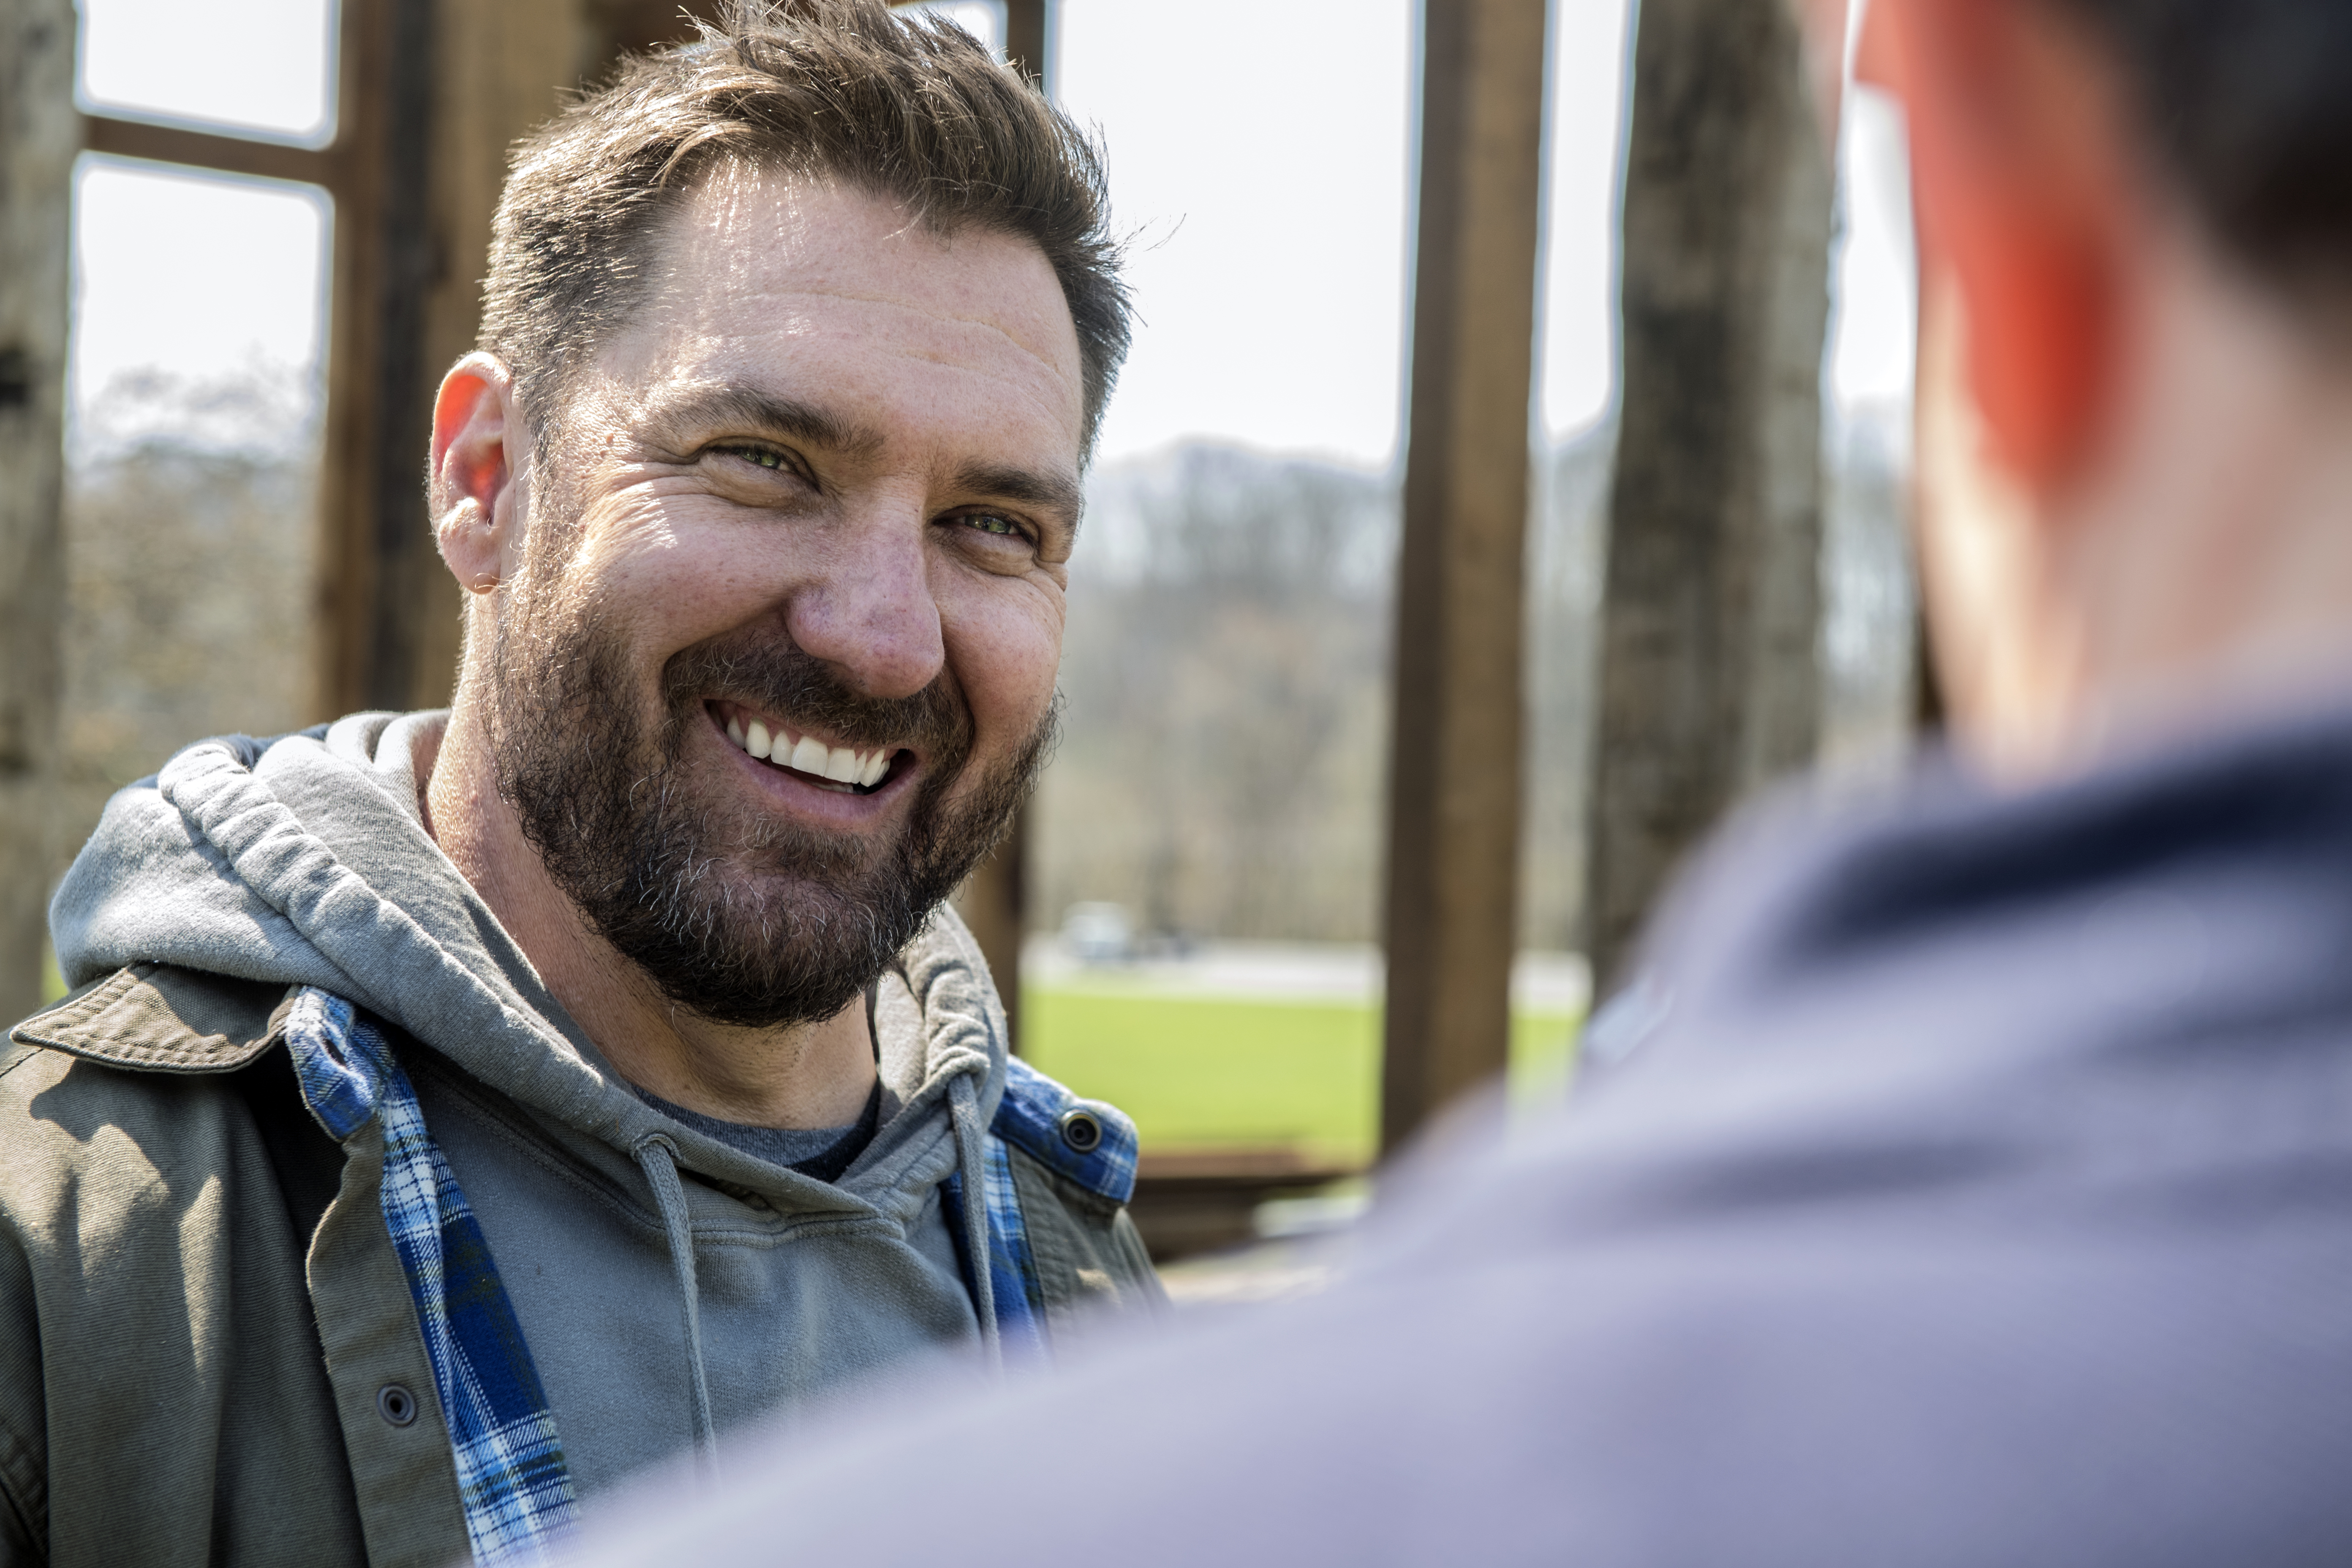 Barnwood Builders episode featuring WVU set to air Sunday | WVU Today